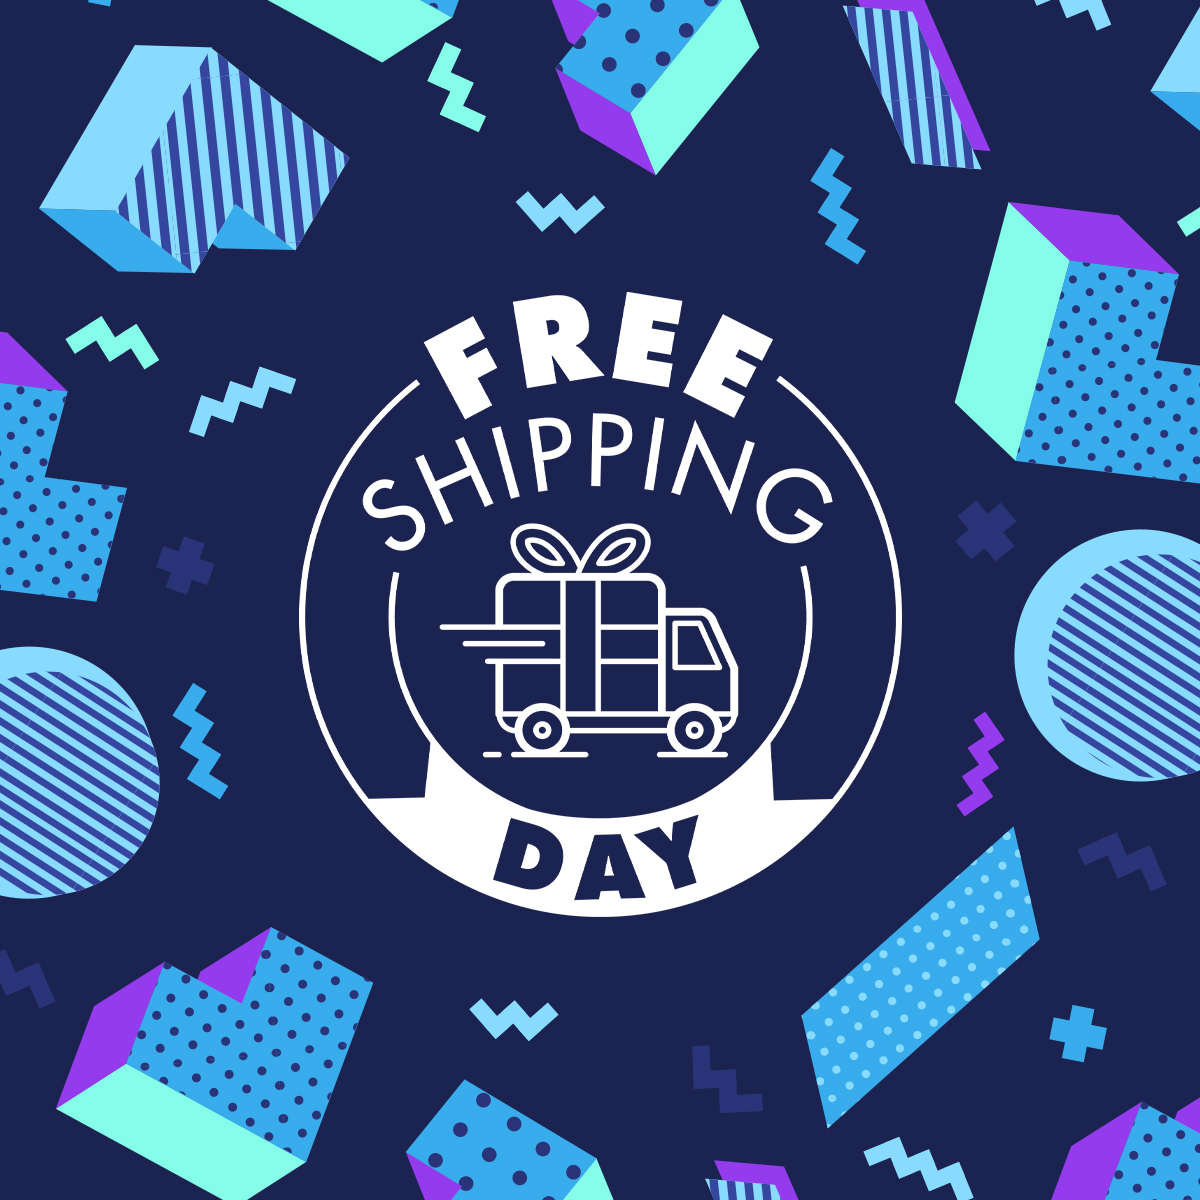 Free Shipping Day 2020